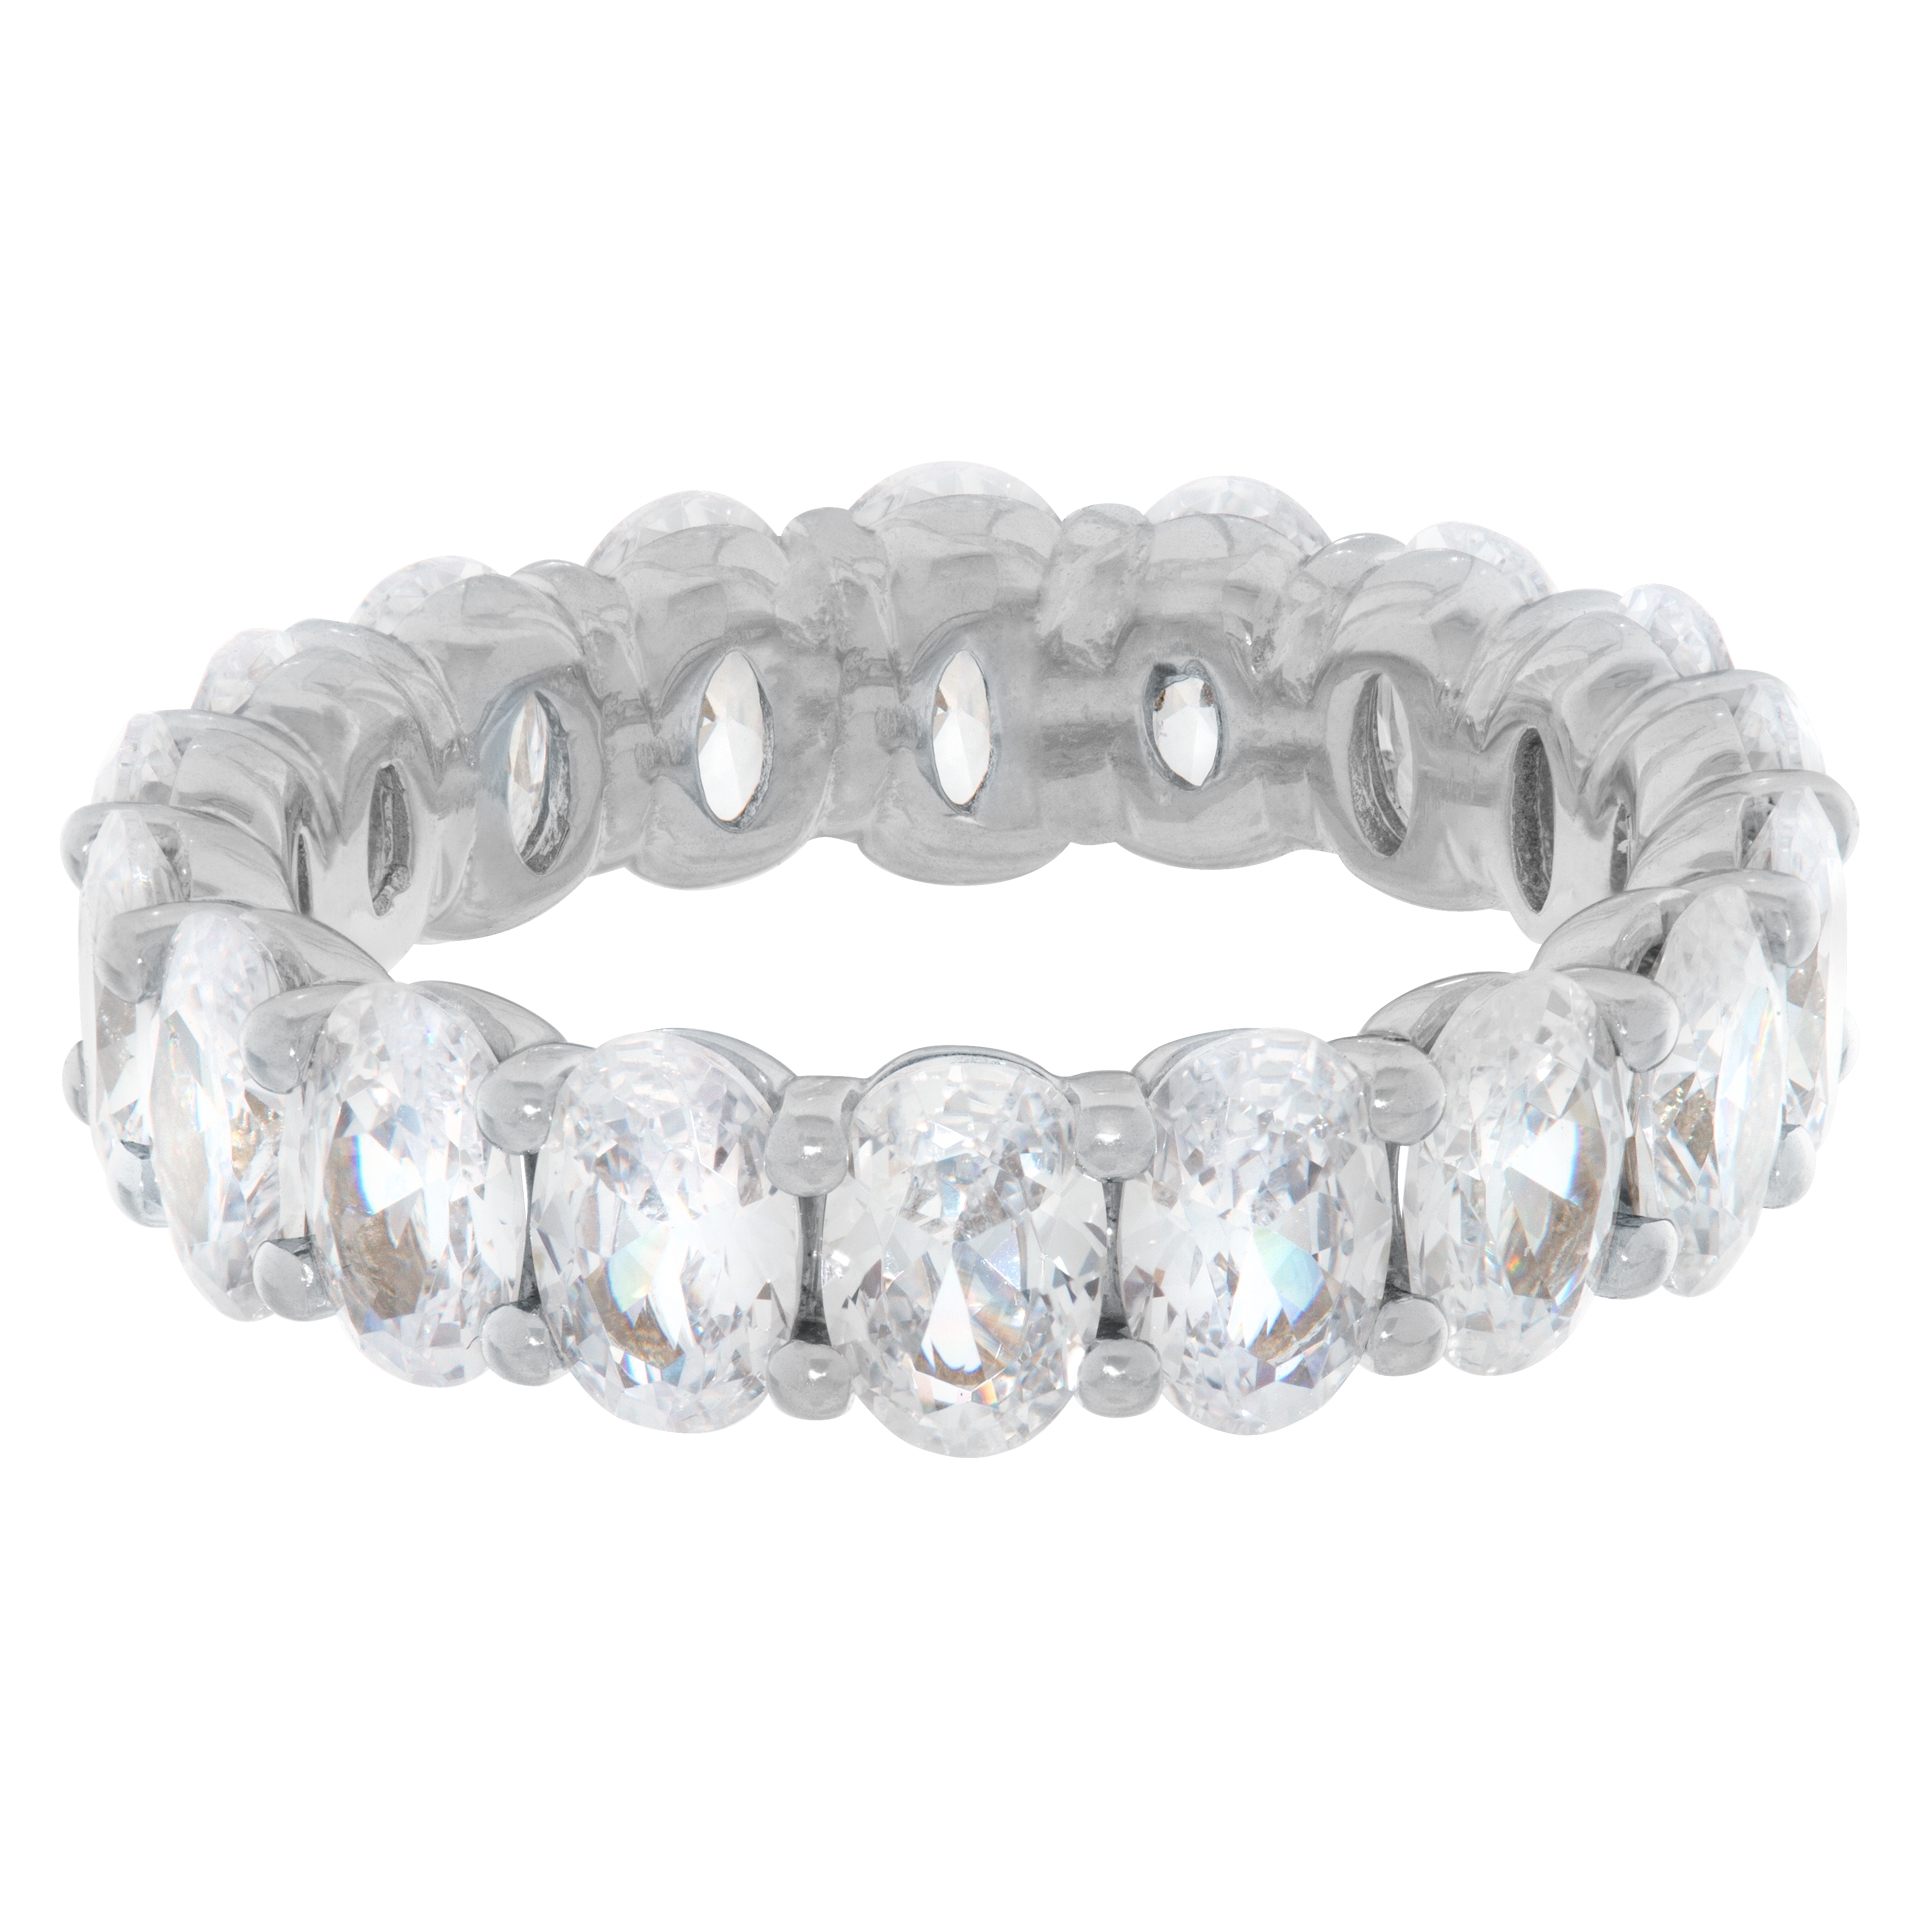 5.5ct Oval Cut Diamond eternity band and ring image 1